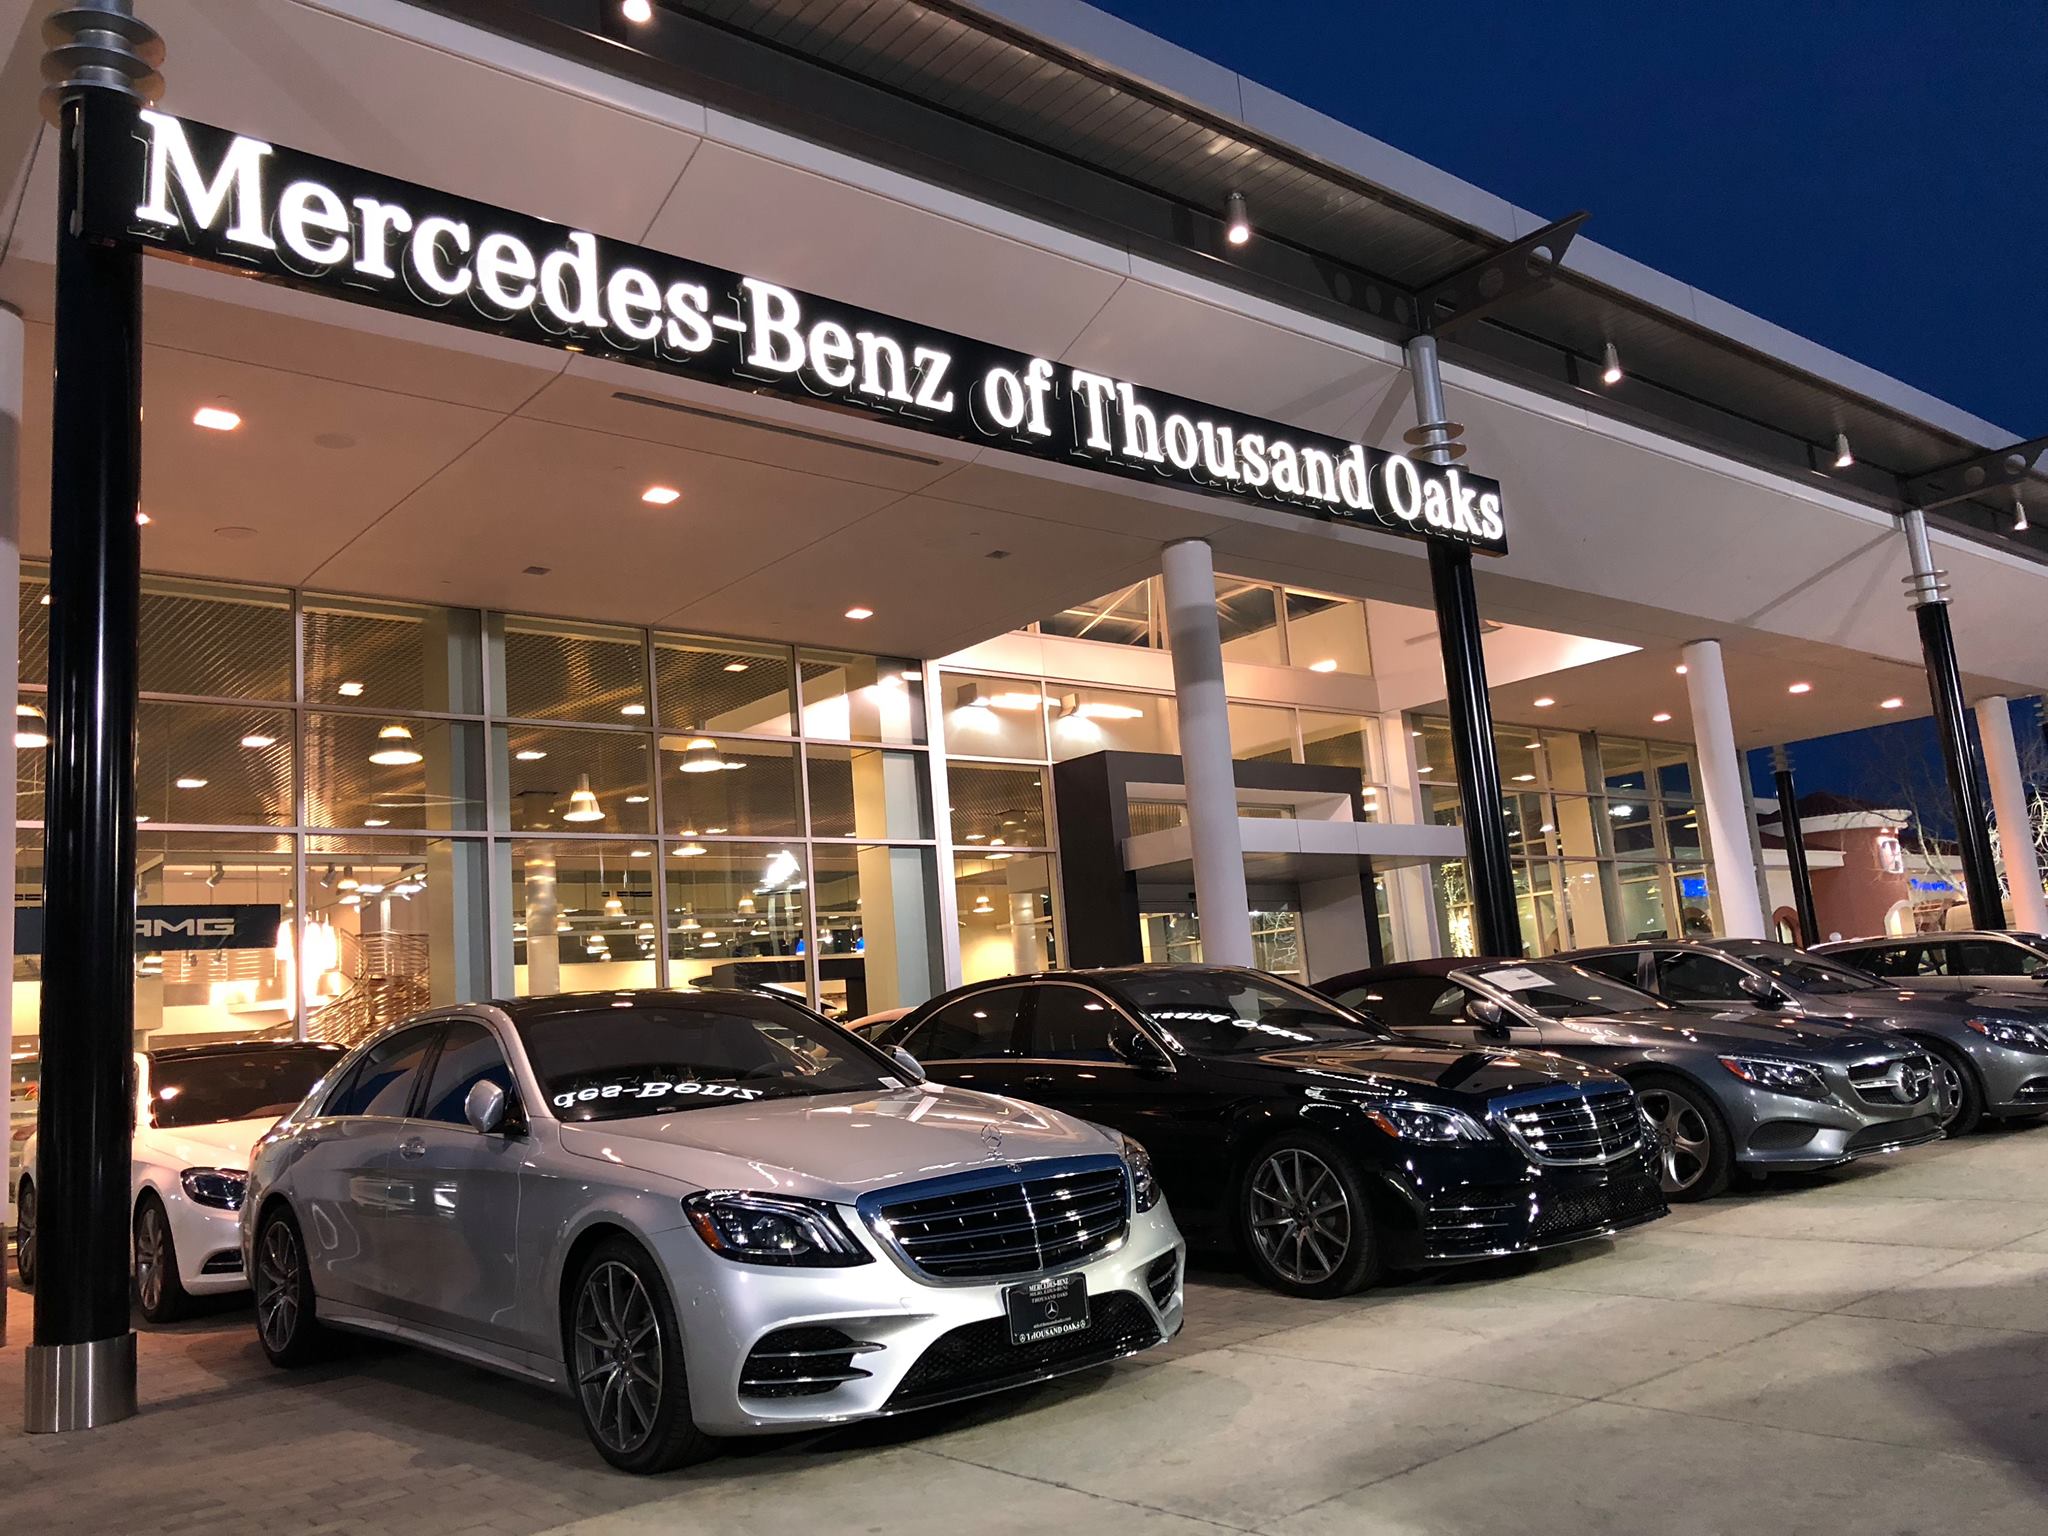 Mercedes Benz Of Thousand Oaks Serving Thousand Oaks For 40 Years